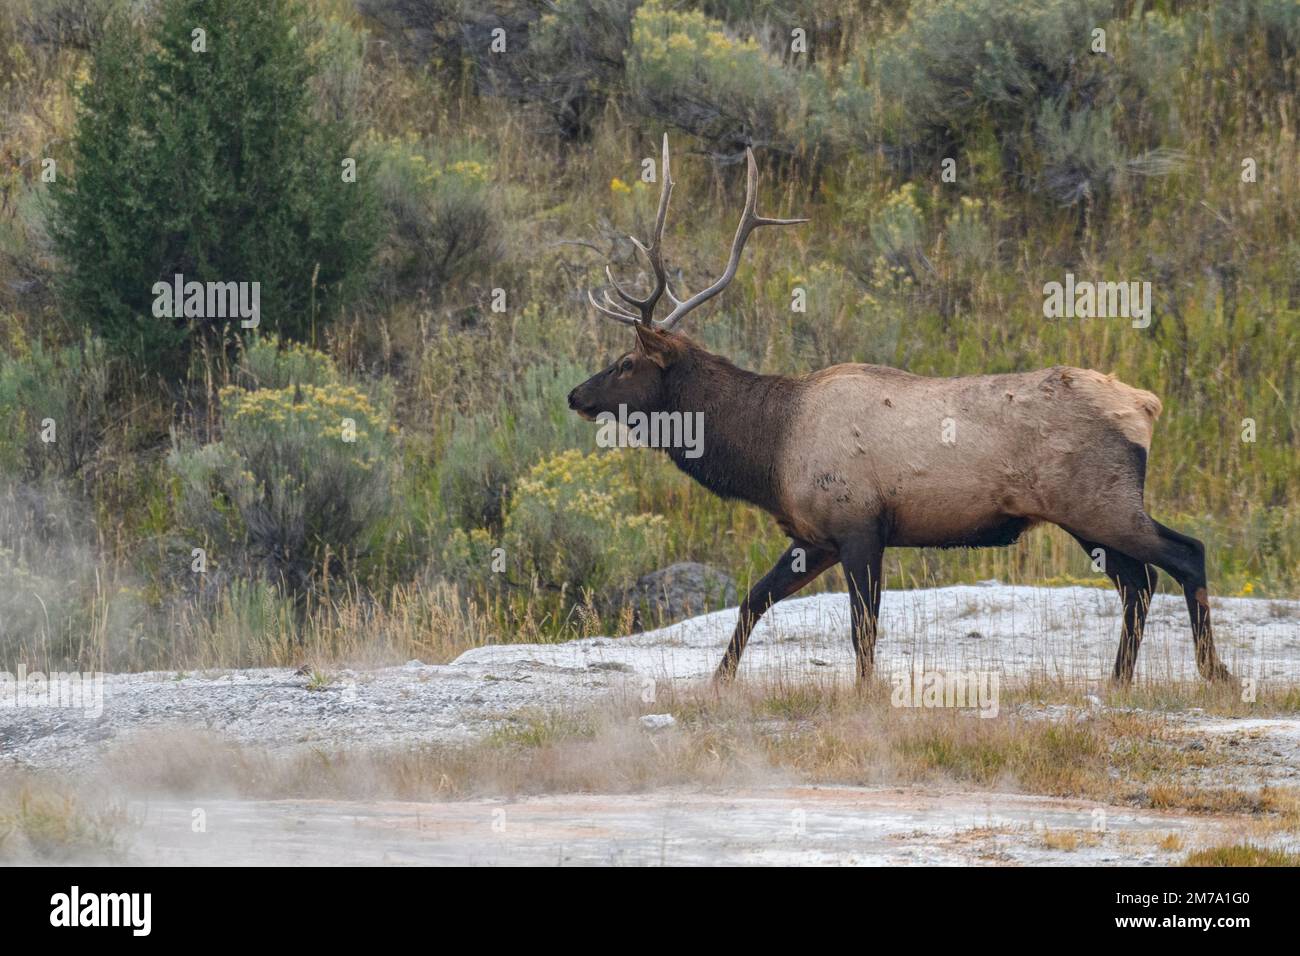 North America, American, USA, Rocky Mountains, West, Yellowstone  National Park, UNESCO, World Heritage, Mammoth Hot Springs, Bull elk Stock Photo